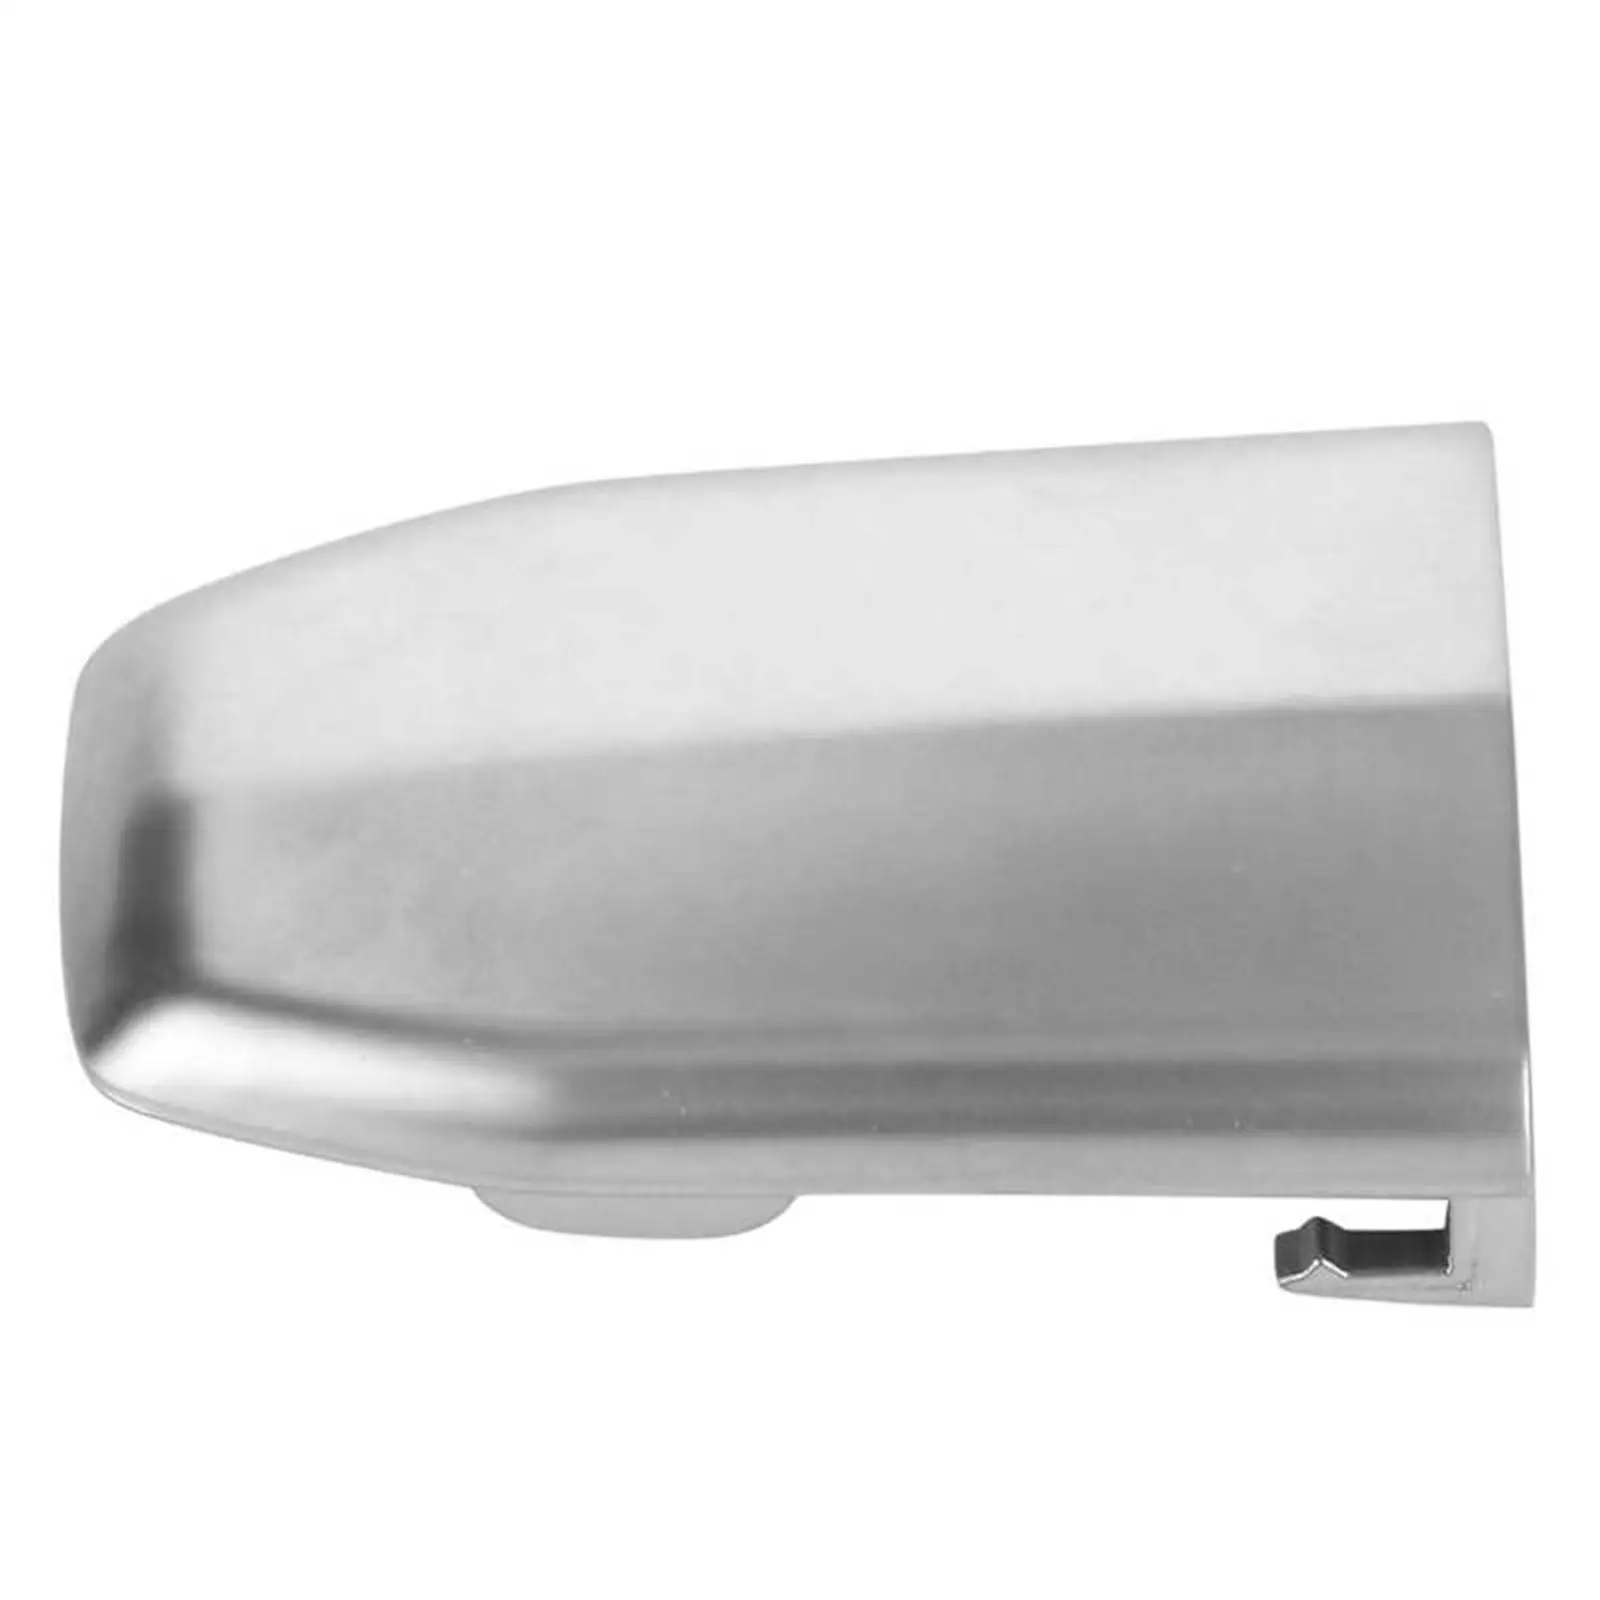 Vehicle Front Car Door 13596115 for Escalade Durable